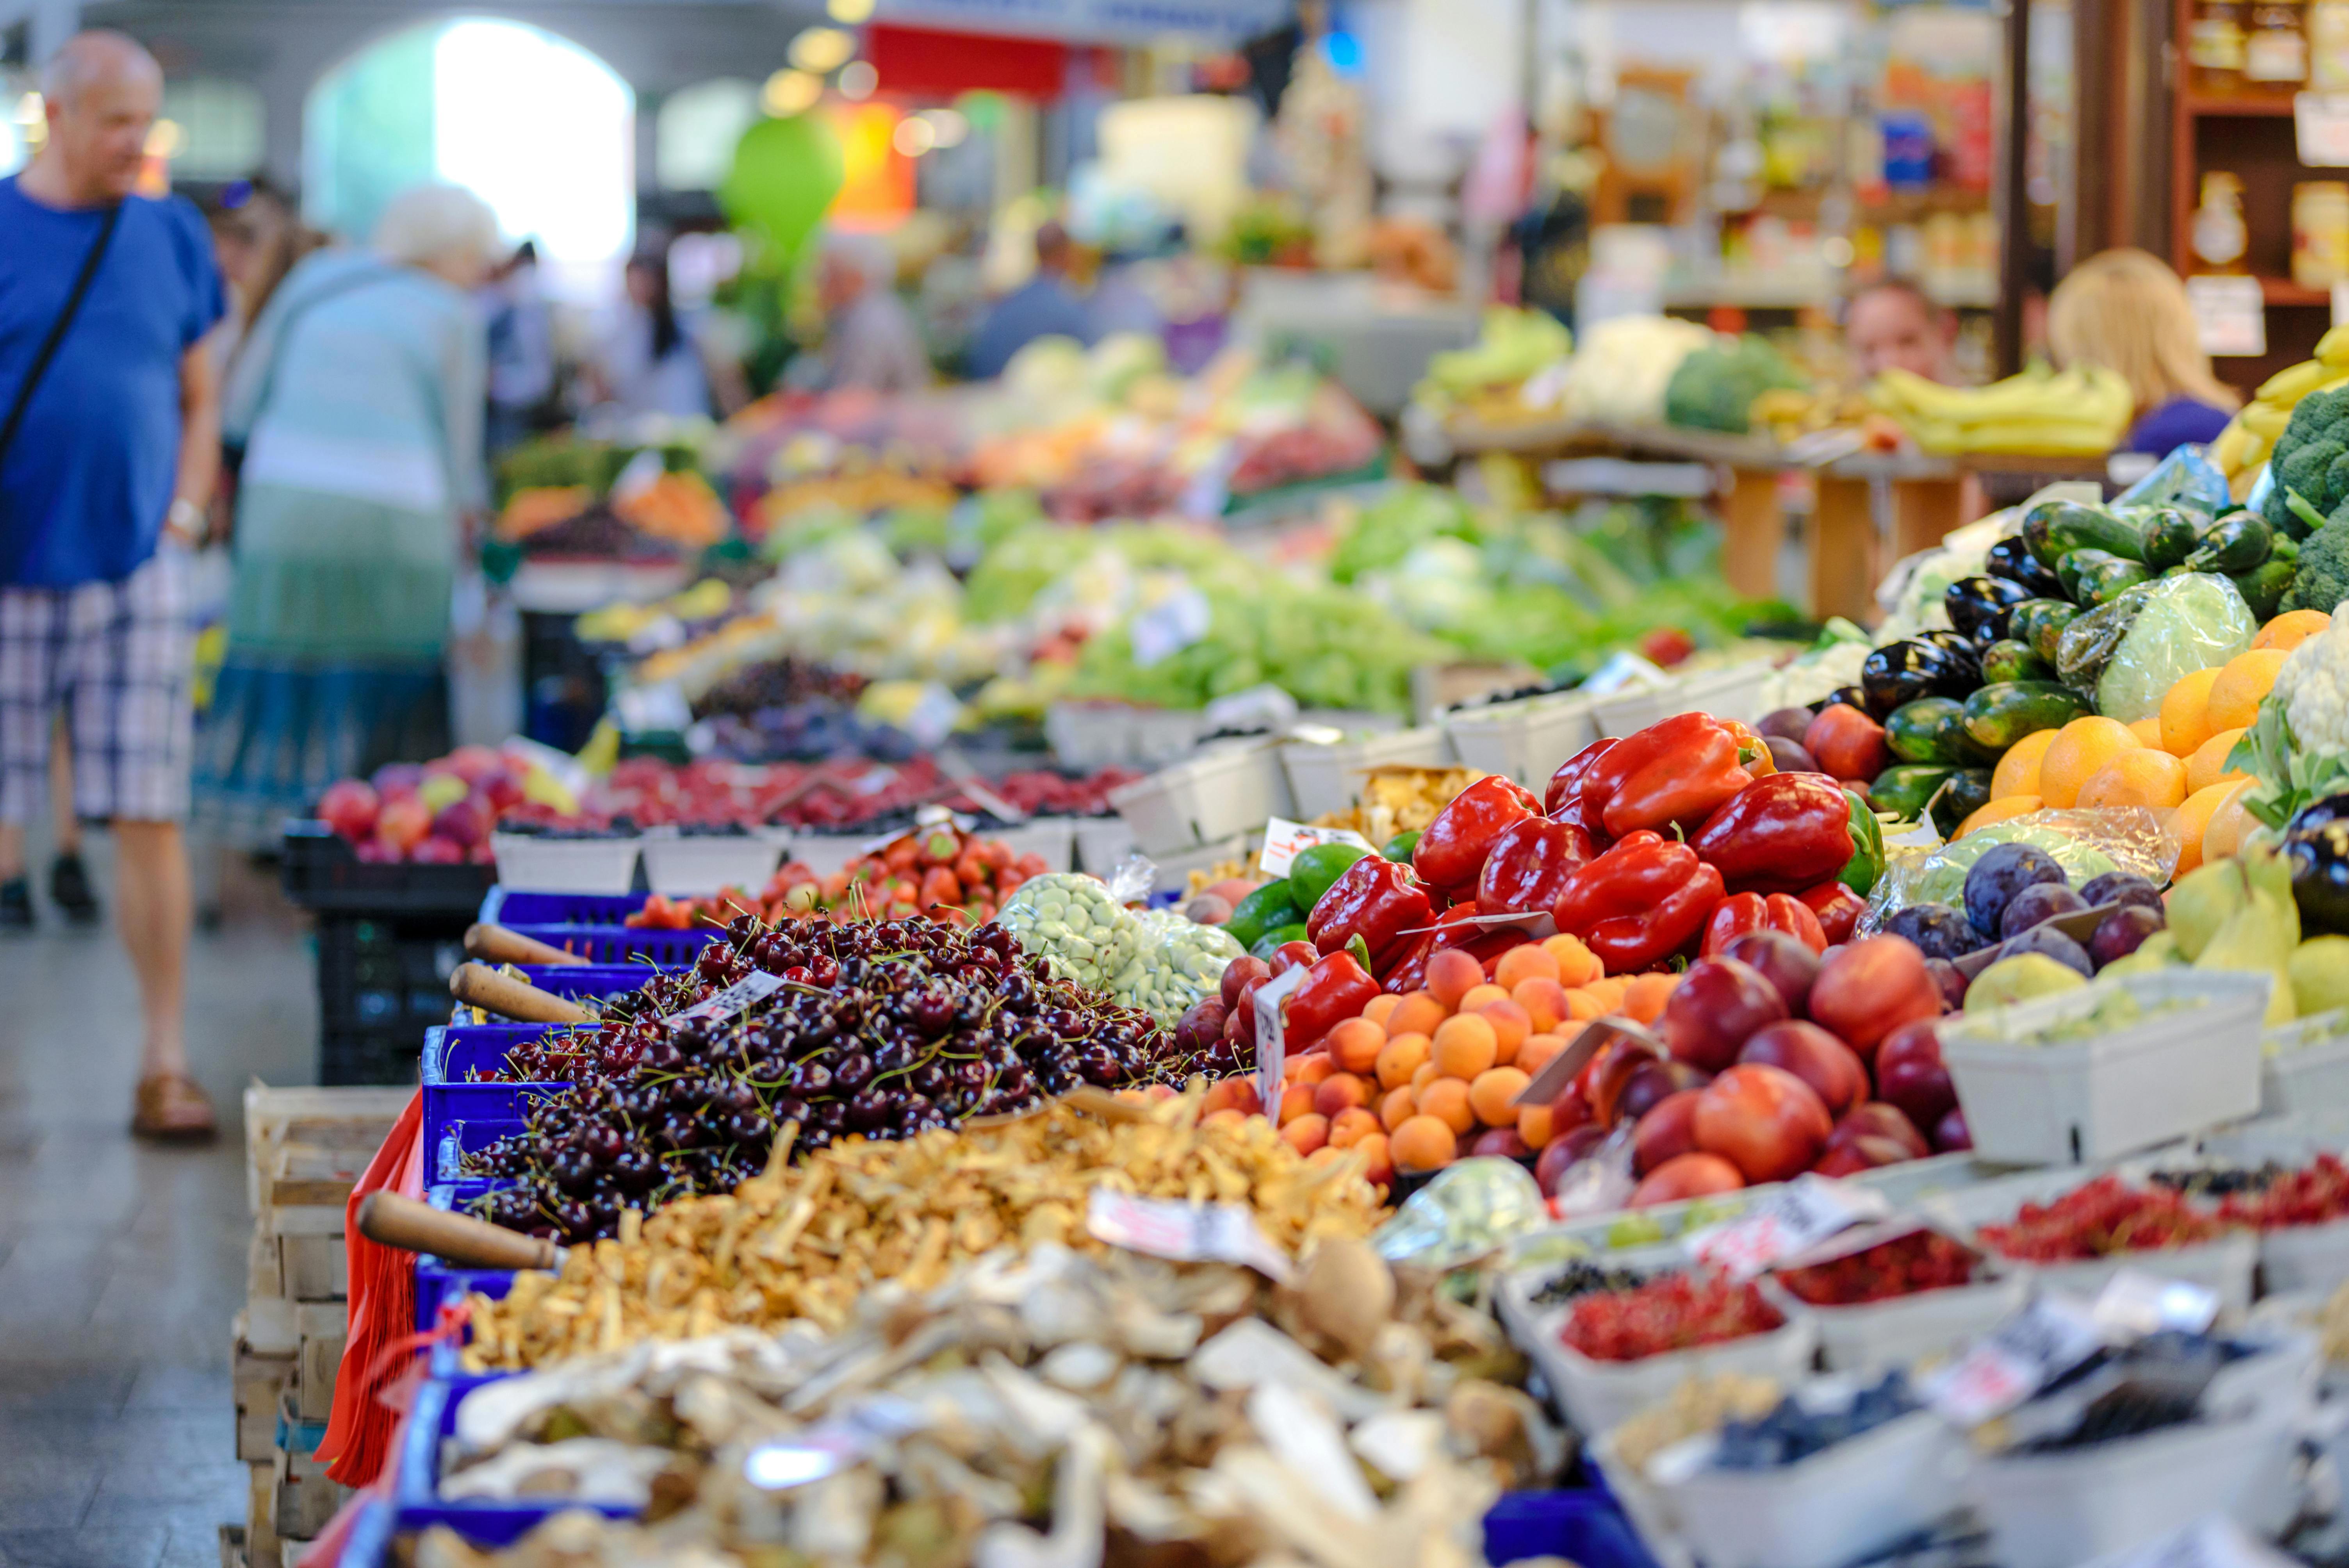 Stock image of fruit and vegetables at a grocery store or market.